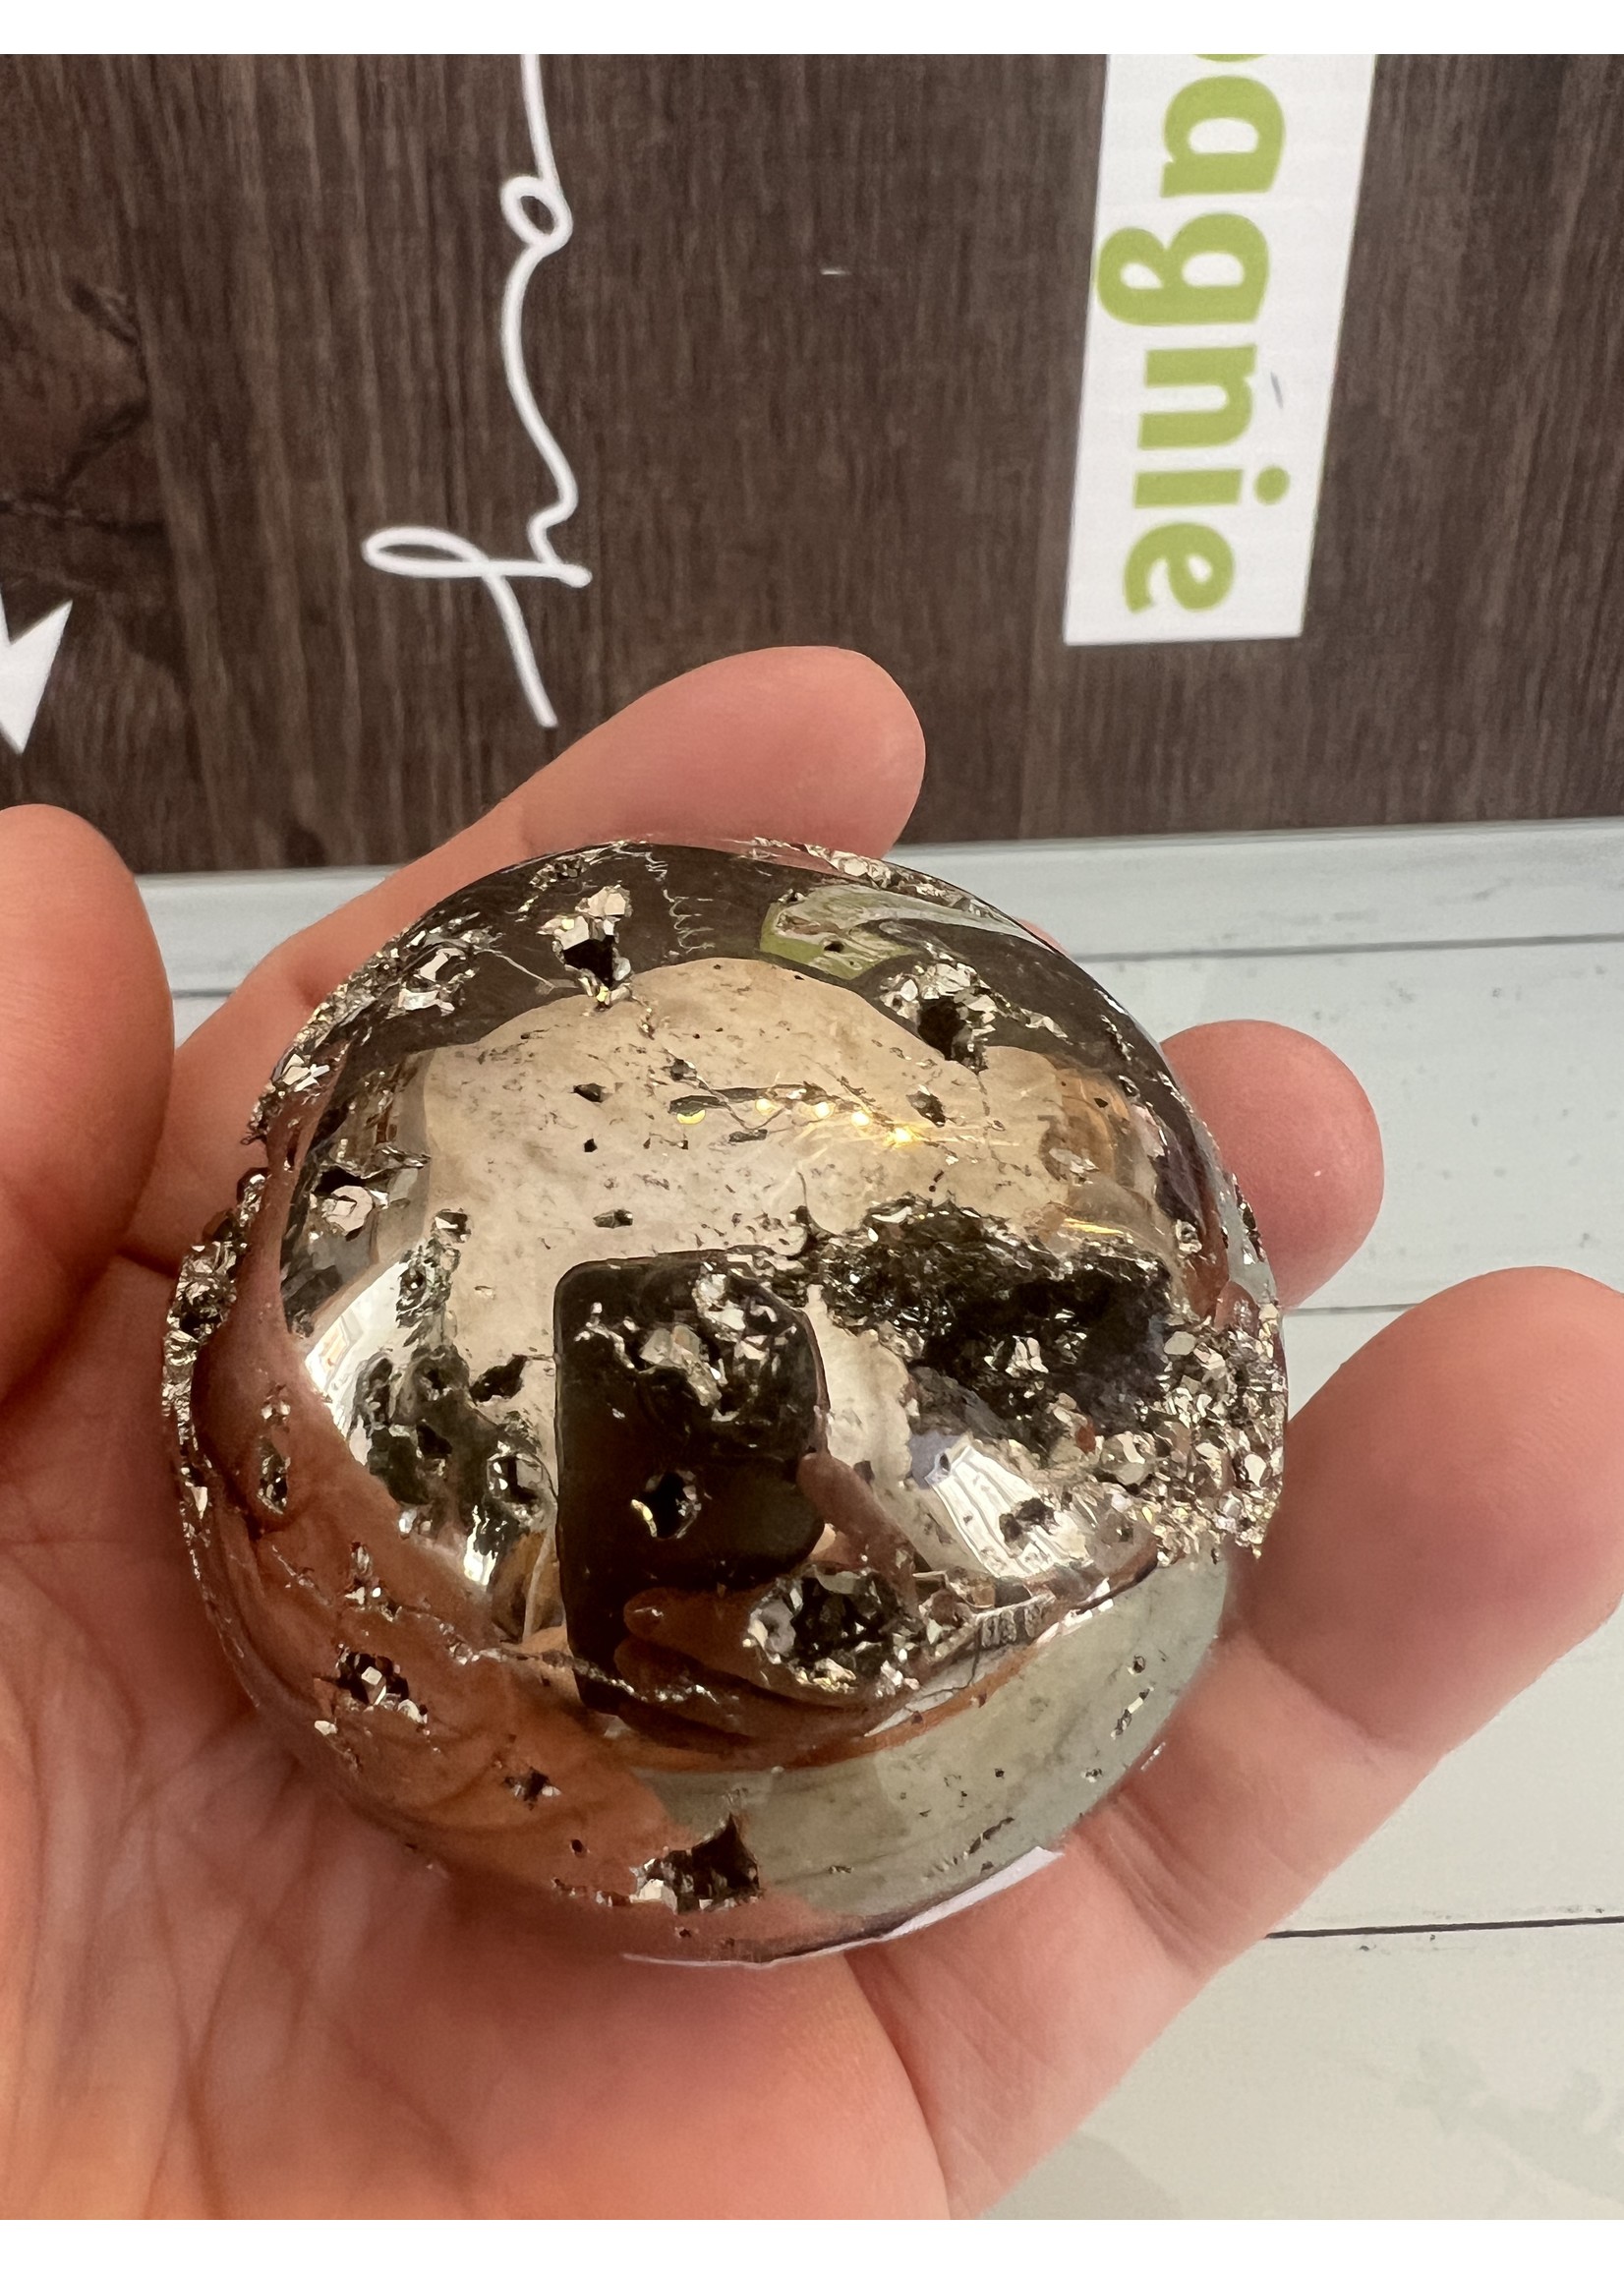 large pyrite crystal ball, large sparkling pyrite sphere, build confidence and improve our faith in life